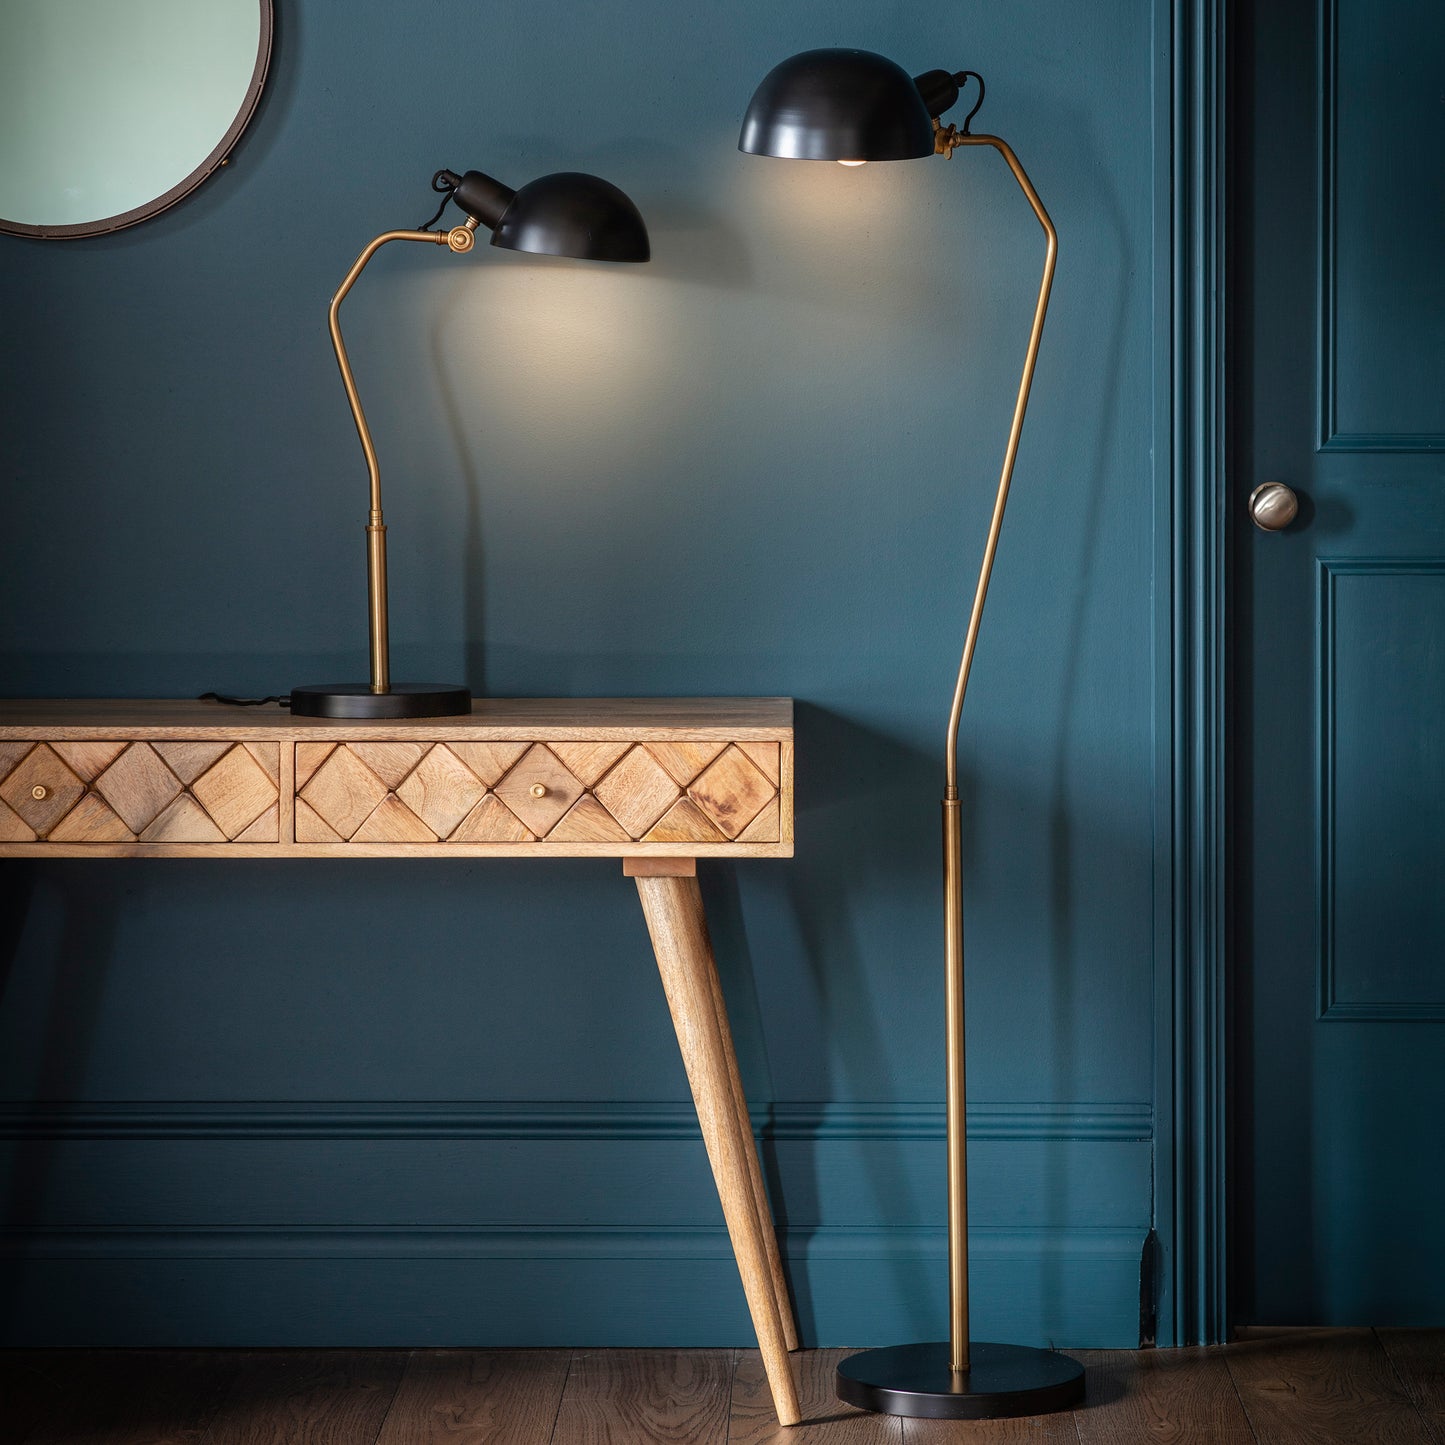 A Lisk Floor Lamp and a table in a room with blue walls, showcasing home furniture from Kikiathome.co.uk.